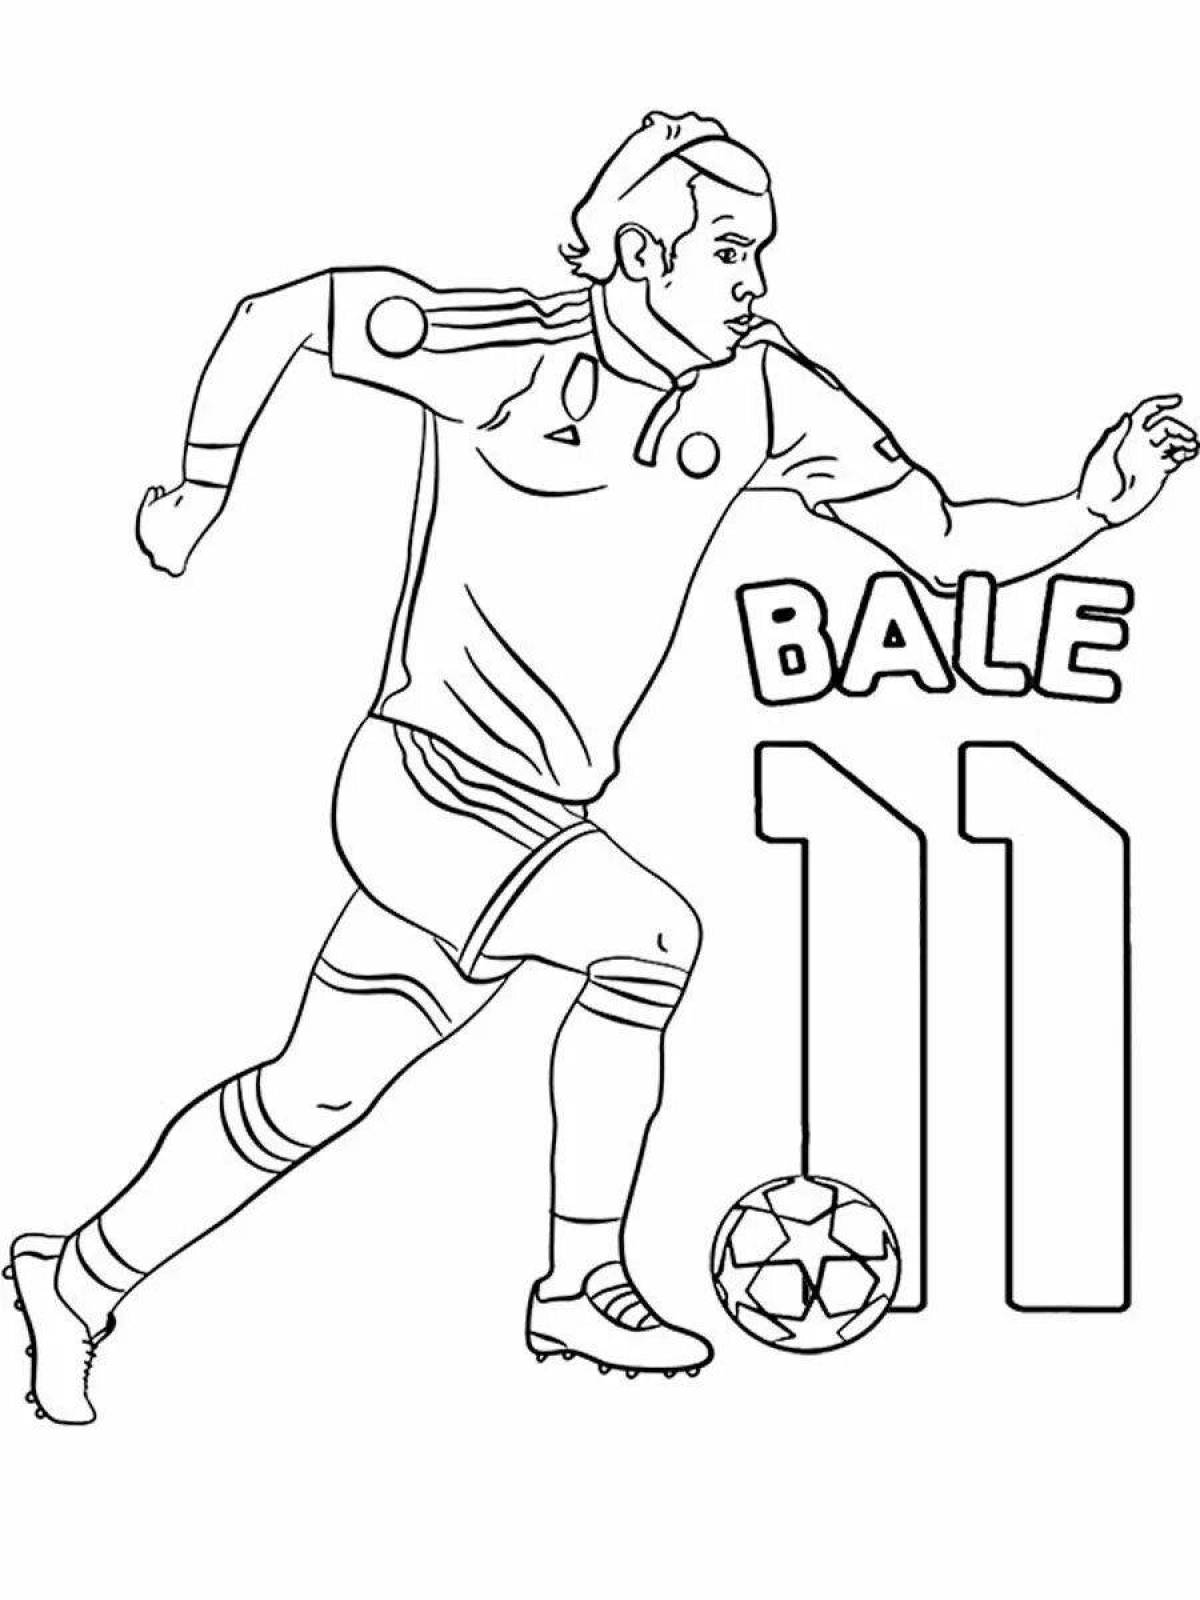 Coloring page agile football players